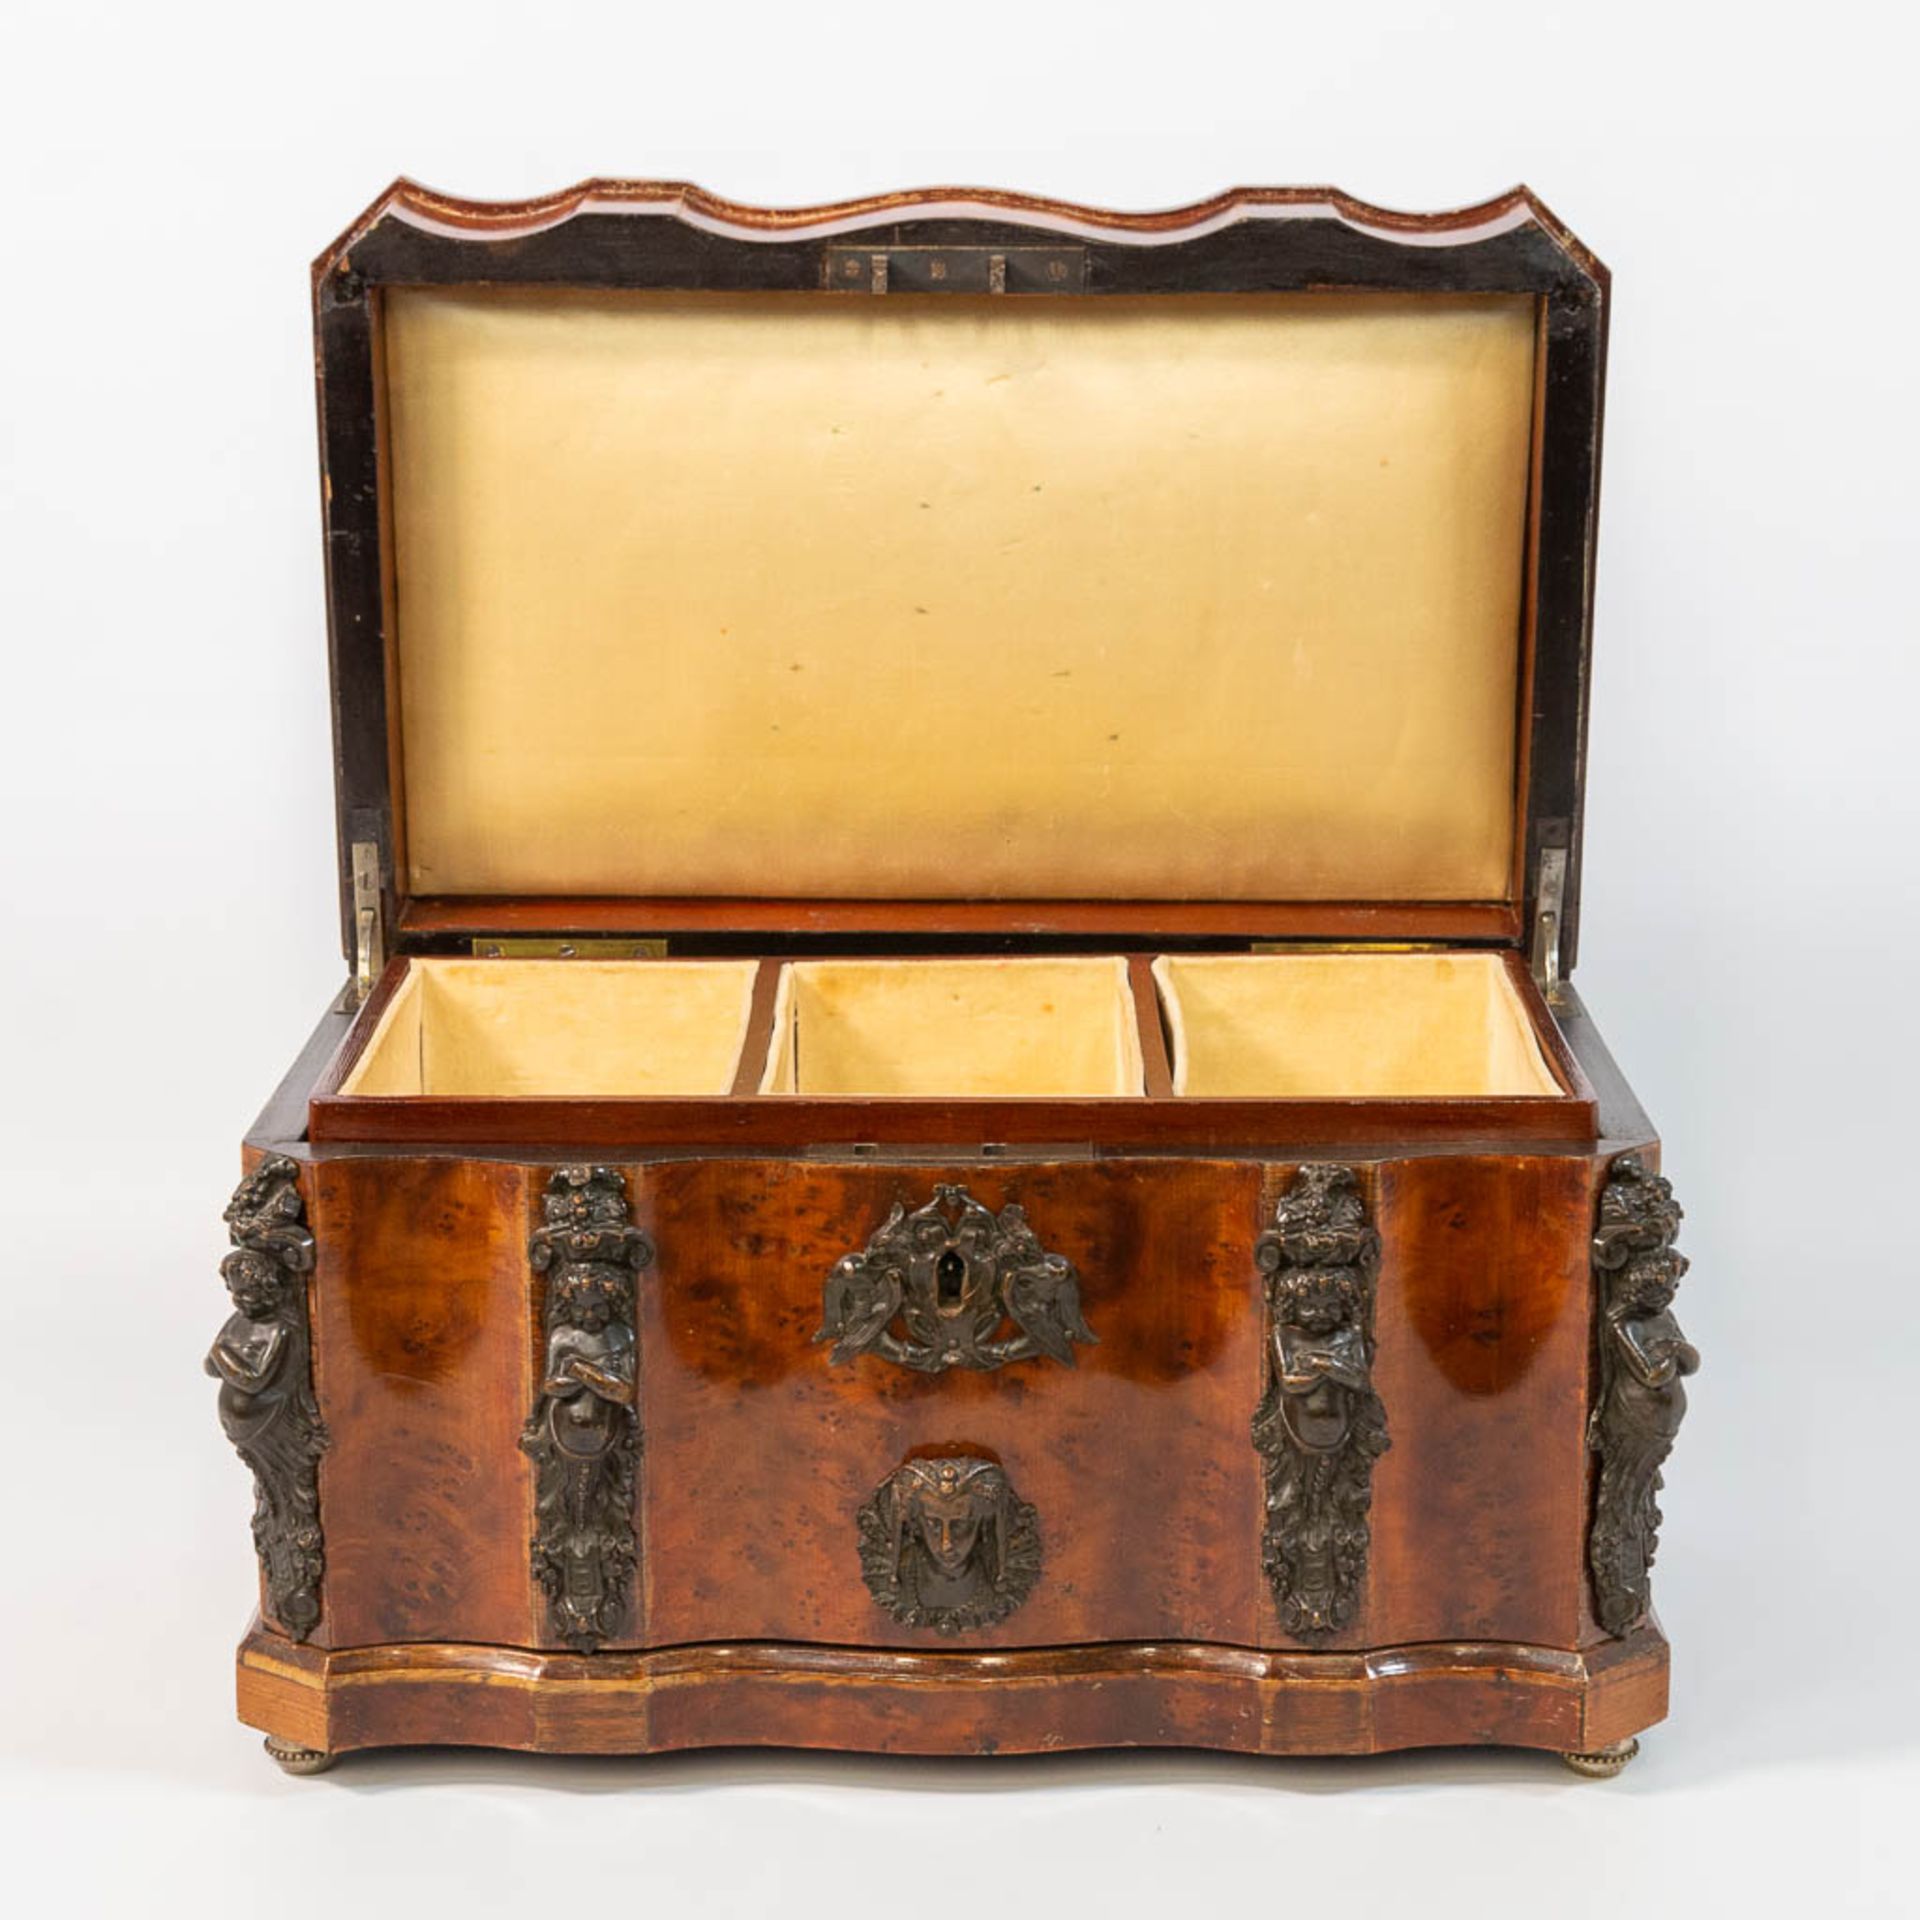 An antique Jewellry box, made of root wood and mounted with bonze hunting scenes, 19th century. - Bild 5 aus 20